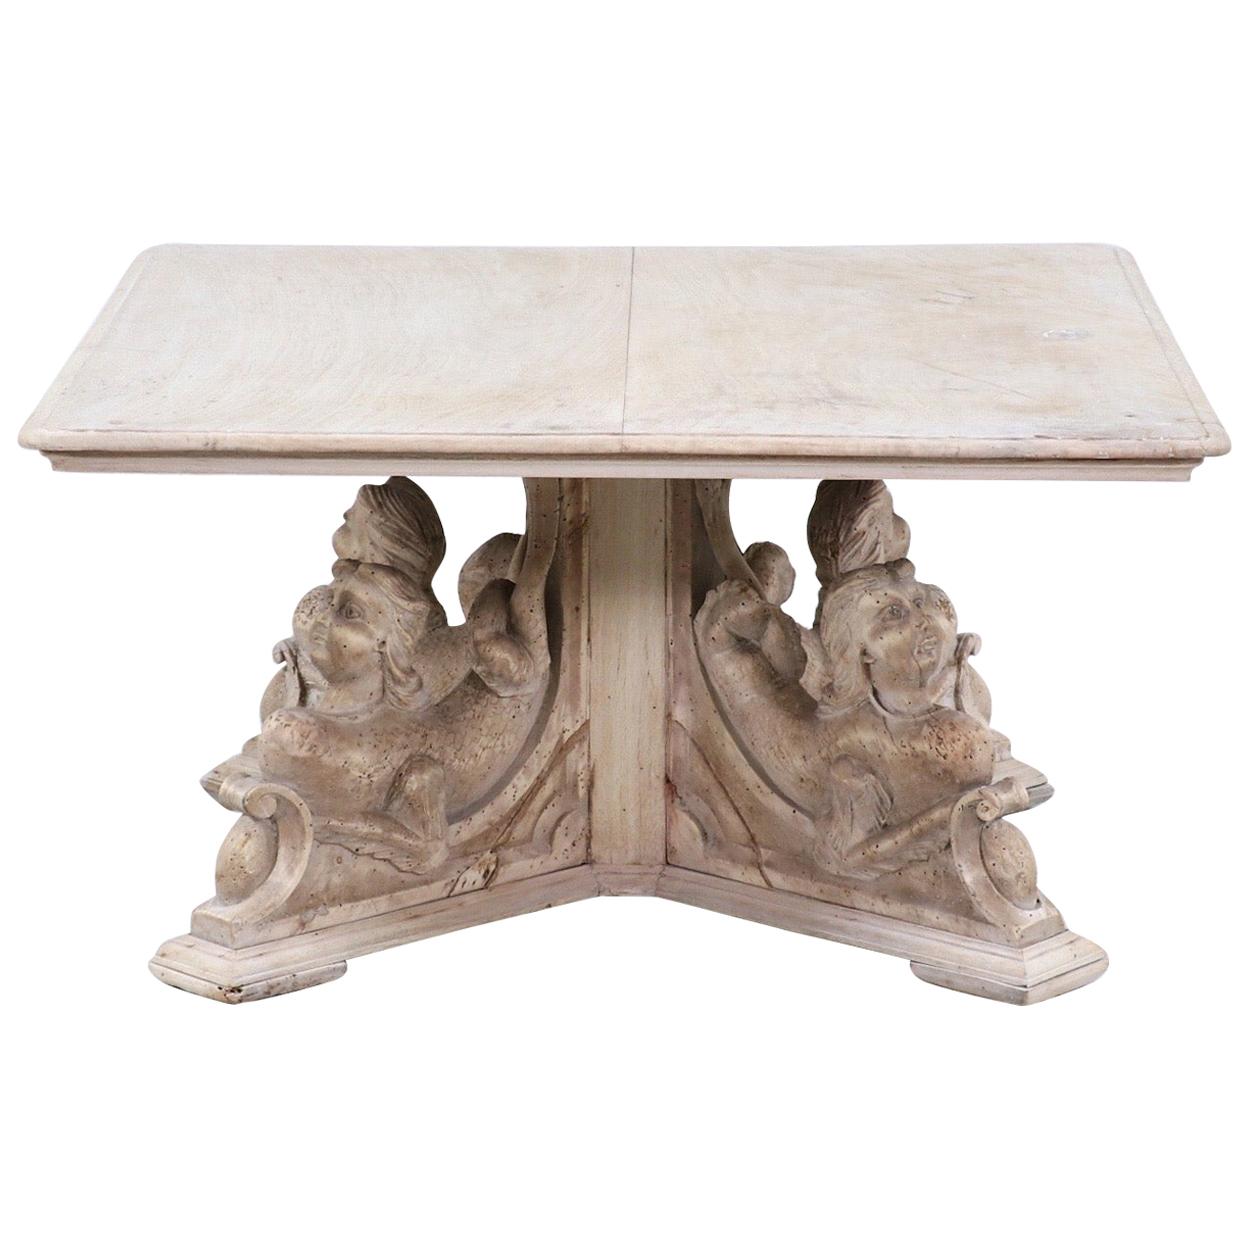 Antique Italian Carved Wood Coffee Table